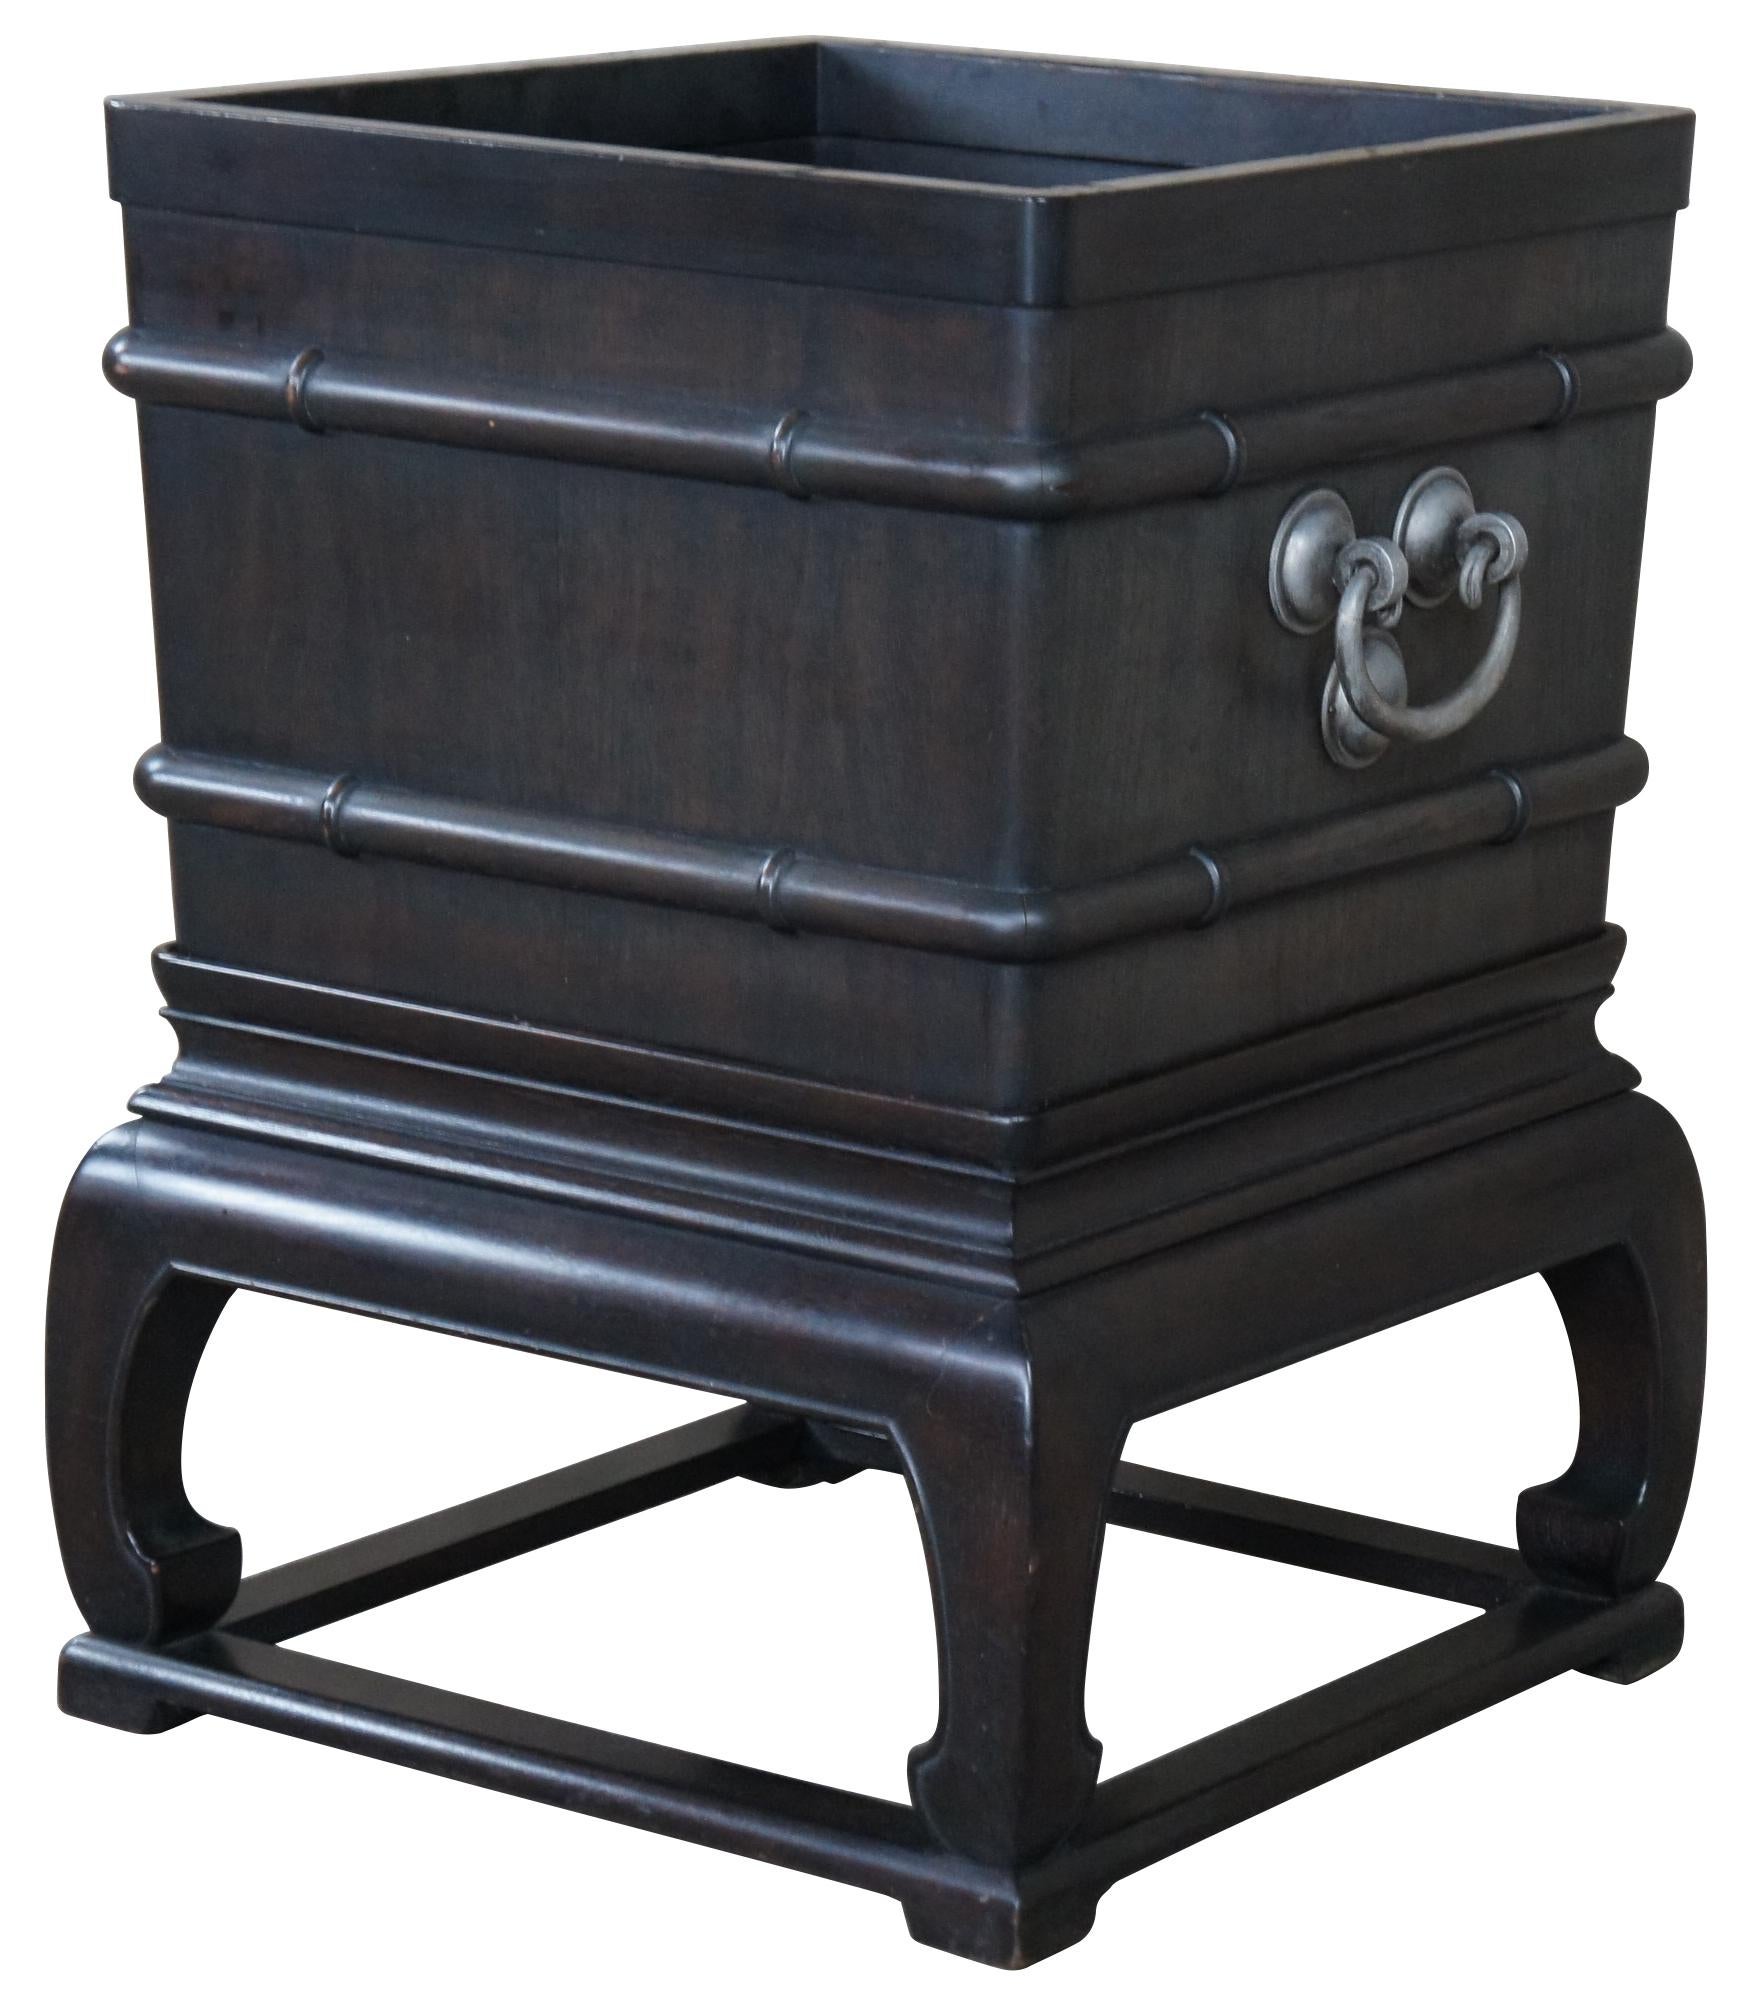 A rare and extraordinary Baker Furnituer Far East Collection planter on stand. Made from dark walnut with bamboo form trim and elegant silver drop pulls. 

After World War II, Hollis Baker visited East Asia, and returned to Grand Rapids inspired